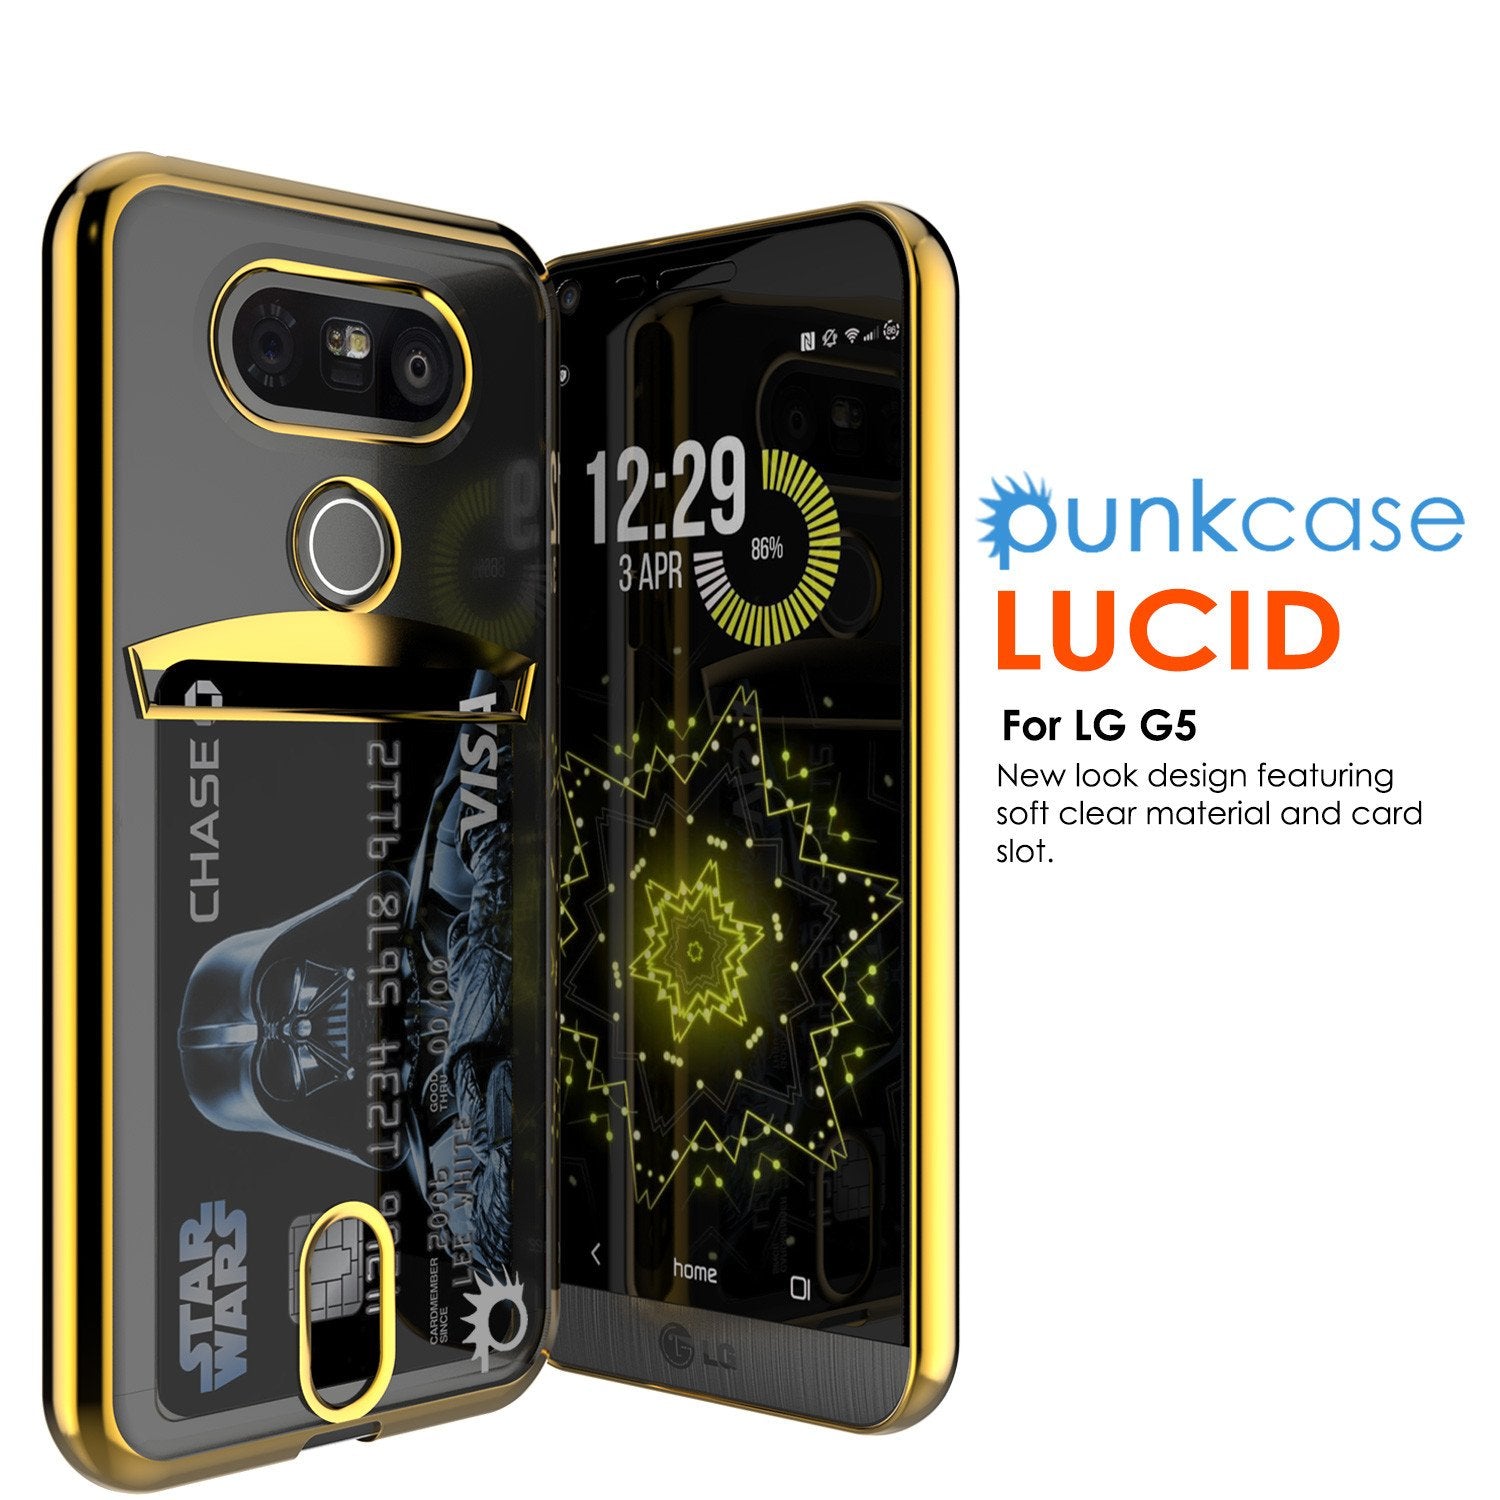 LG G5 Case, PUNKCASE® Gold LUCID Series | Card Slot | PUNK SHIELD Screen Protector | Ultra Fit - PunkCase NZ